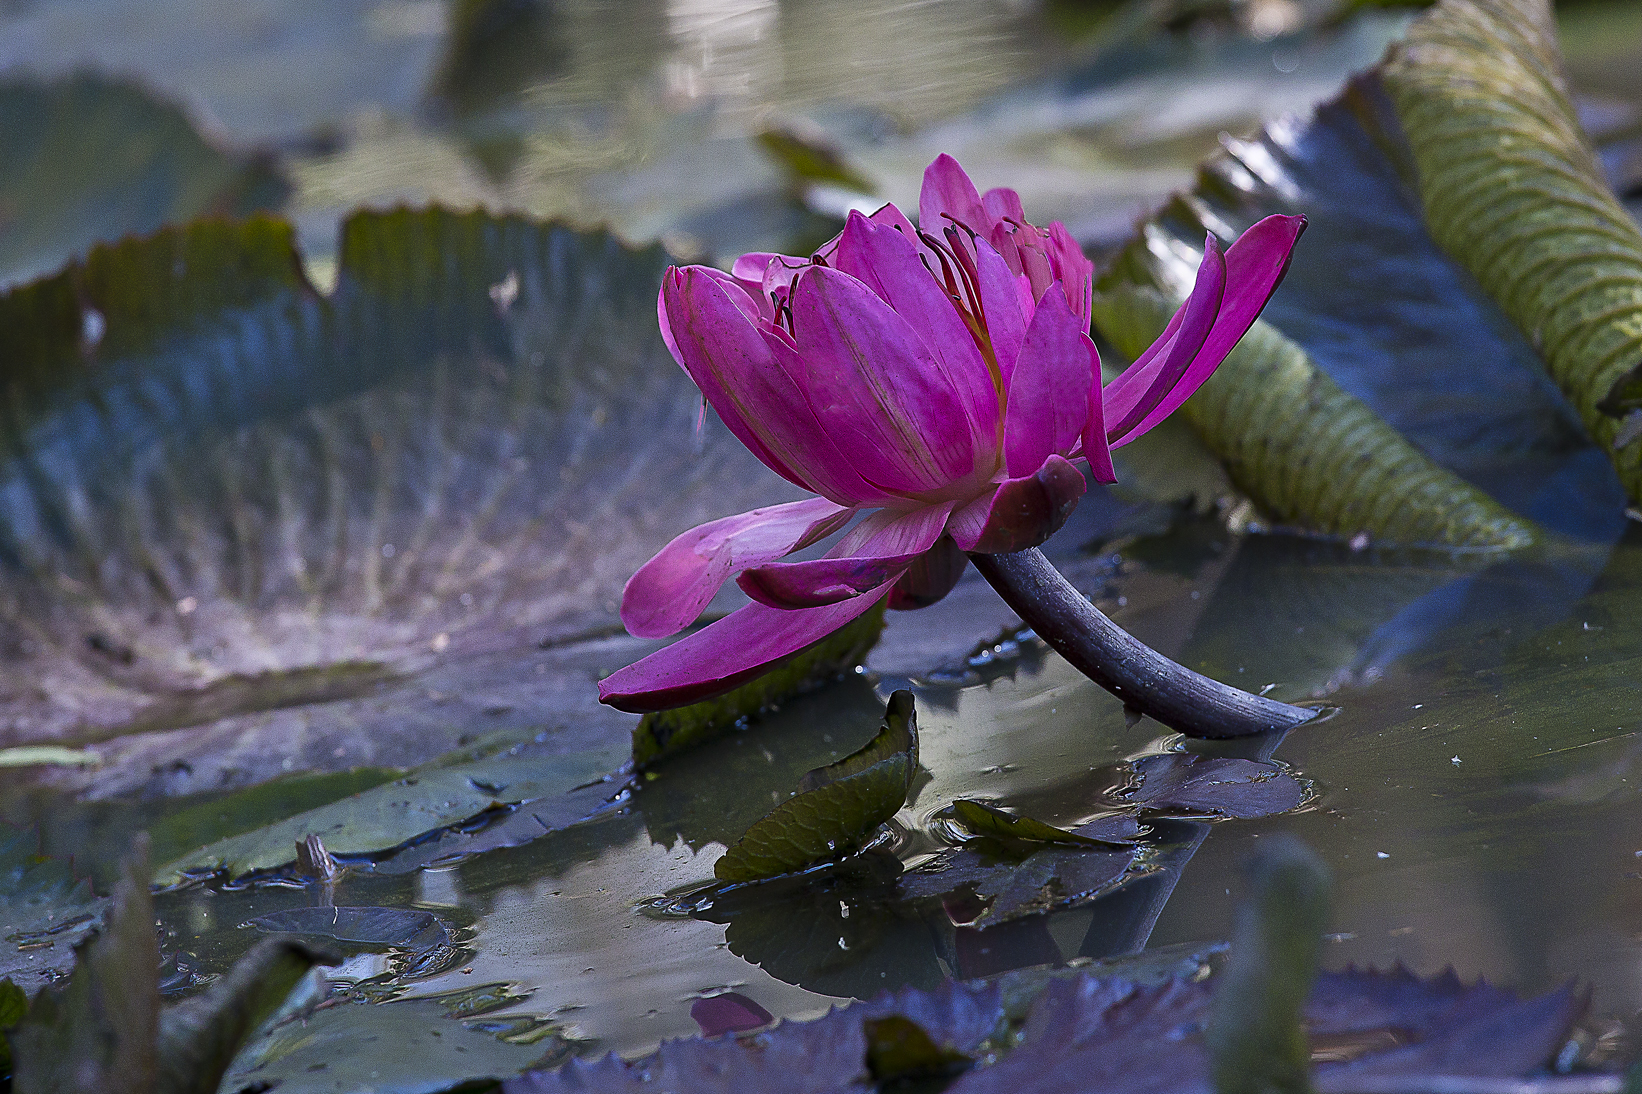 a pink flower is shown floating on the water